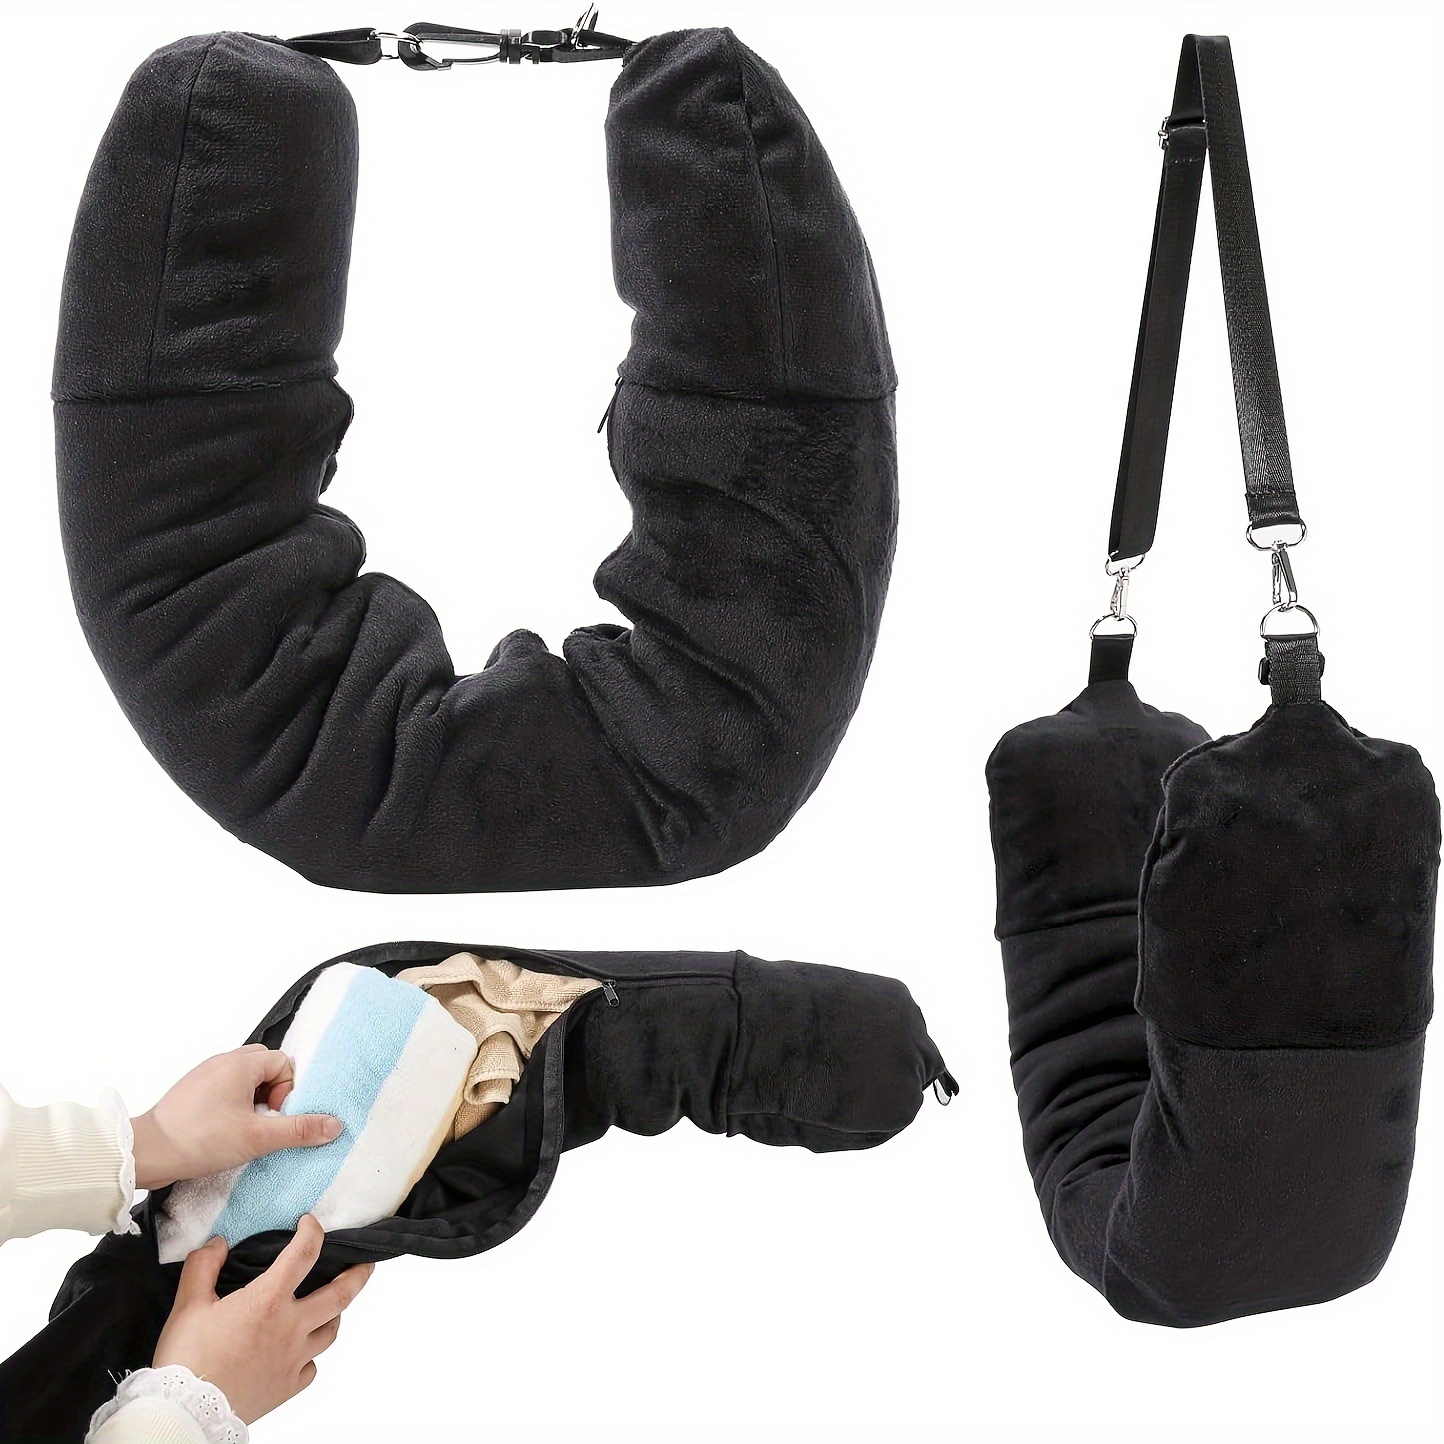 

Travel Neck Pillow U-shaped, Adjustable Soft Fleece Cover, Machine Washable, Lightweight, Whole Body Support, Woven, Stuffable With Clothes For Comfort - Convenient Storage Pouch Included